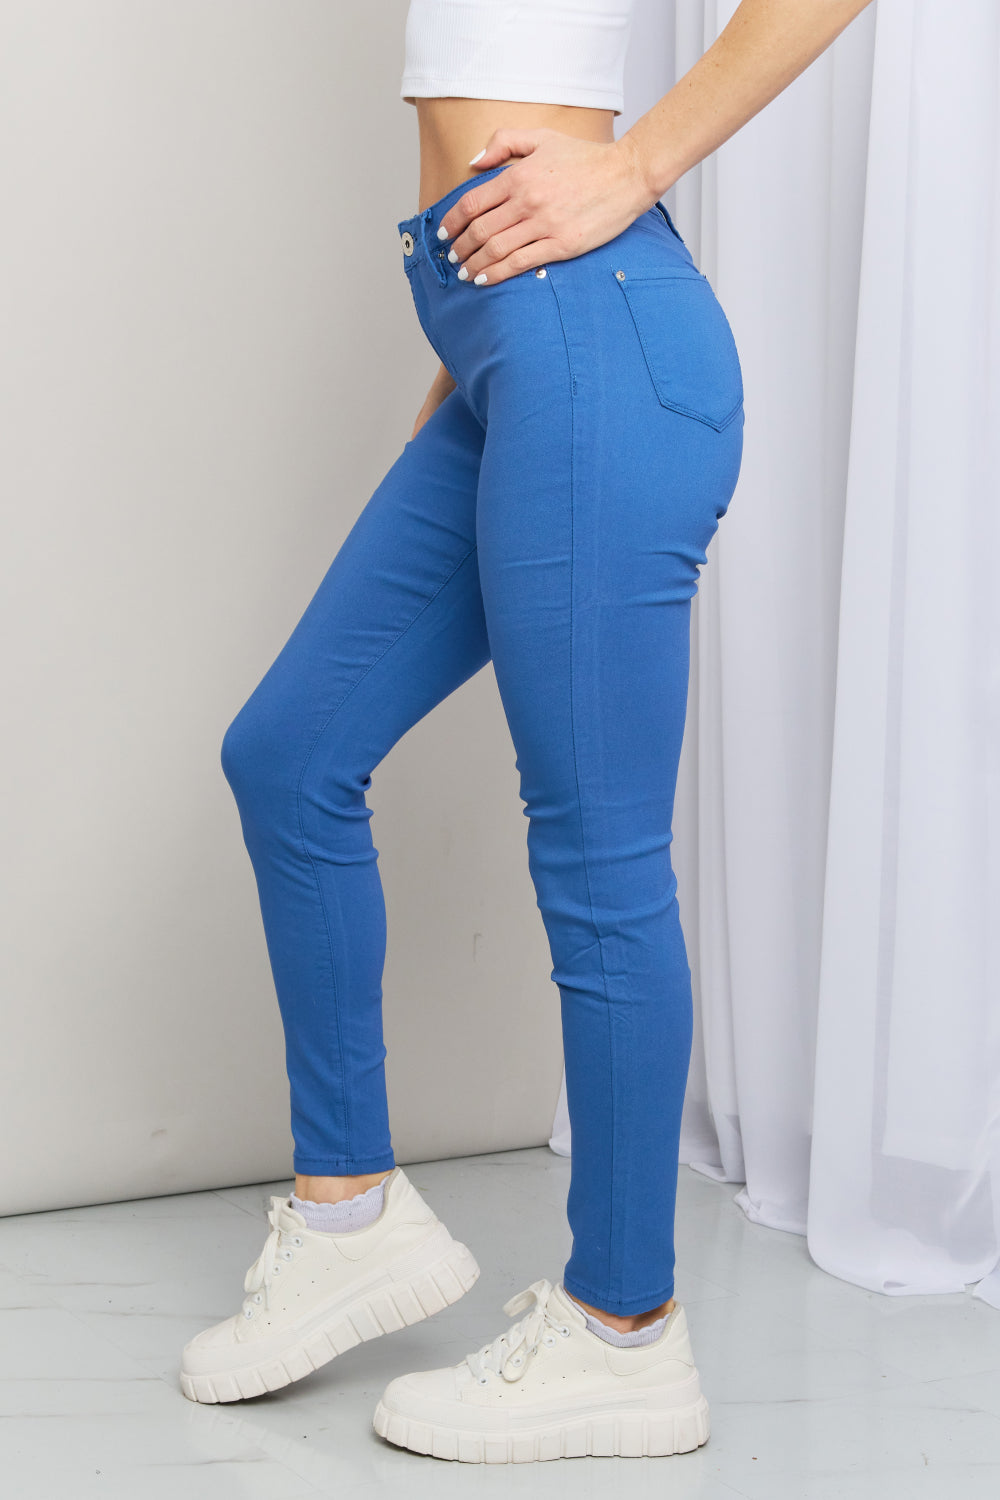 Kate Hyper-Stretch Full Size Mid-Rise Skinny Jeans in Electric Blue | Jeans - CHANELIA